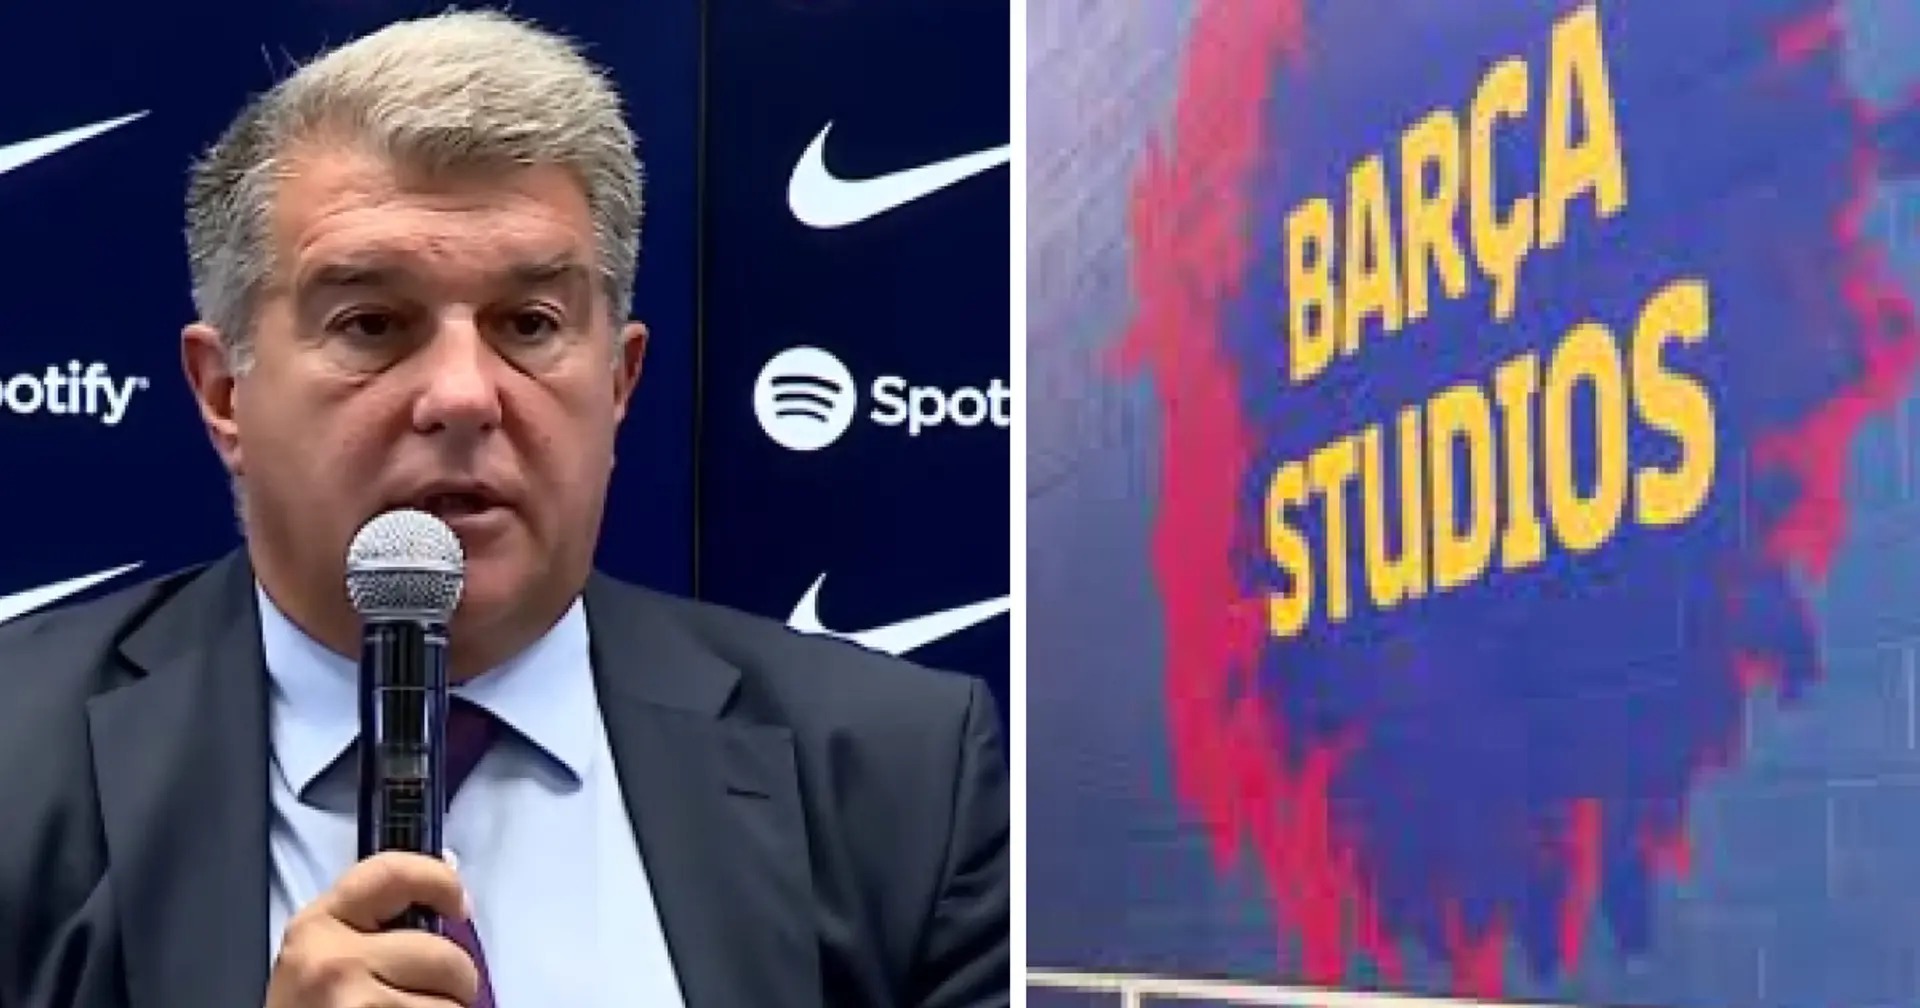 Joan Laporta confirms Barca have activated third economic lever for €100m